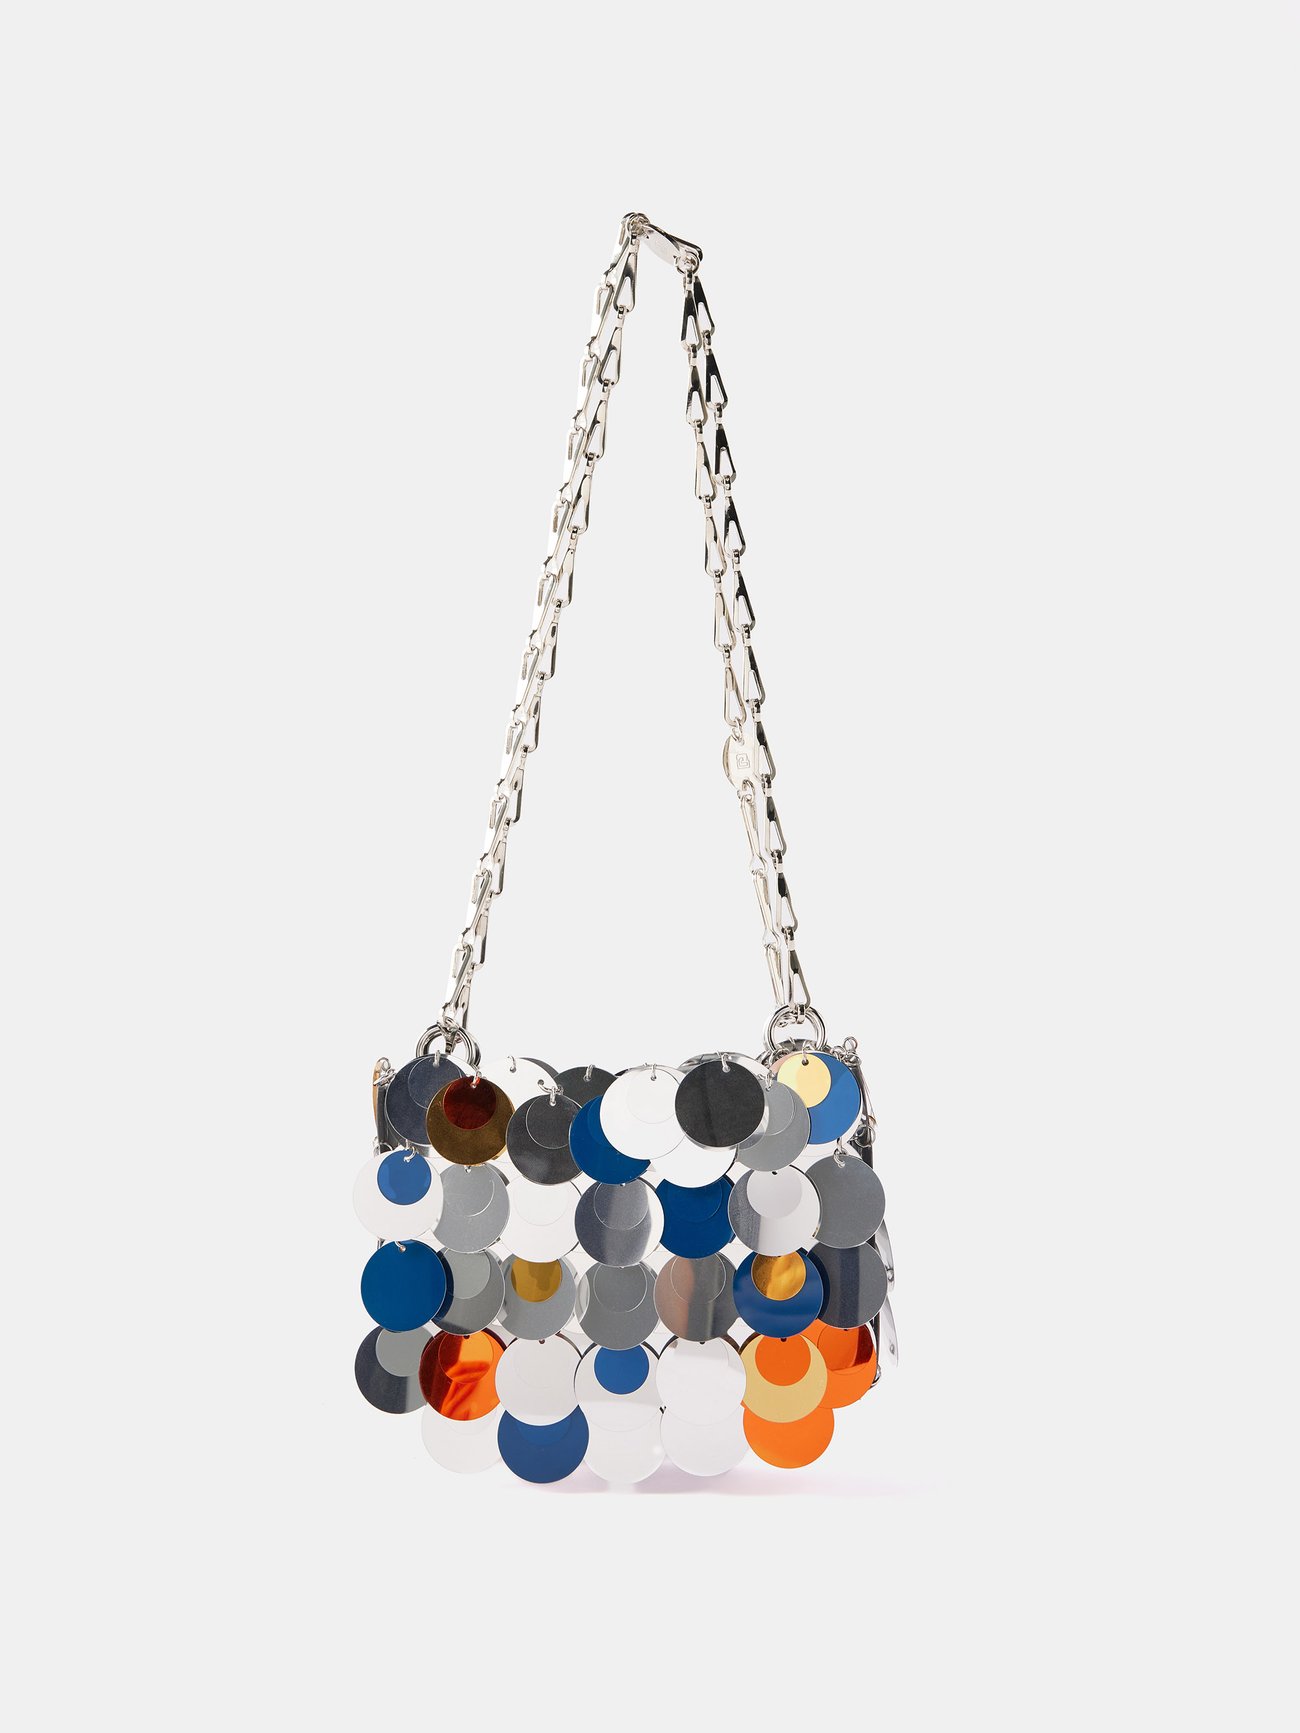 Paco Rabanne draws on 1960s designs for this multicoloured Sparkle shoulder bag, faceted with hundreds of paillettes that are held together with metal links.